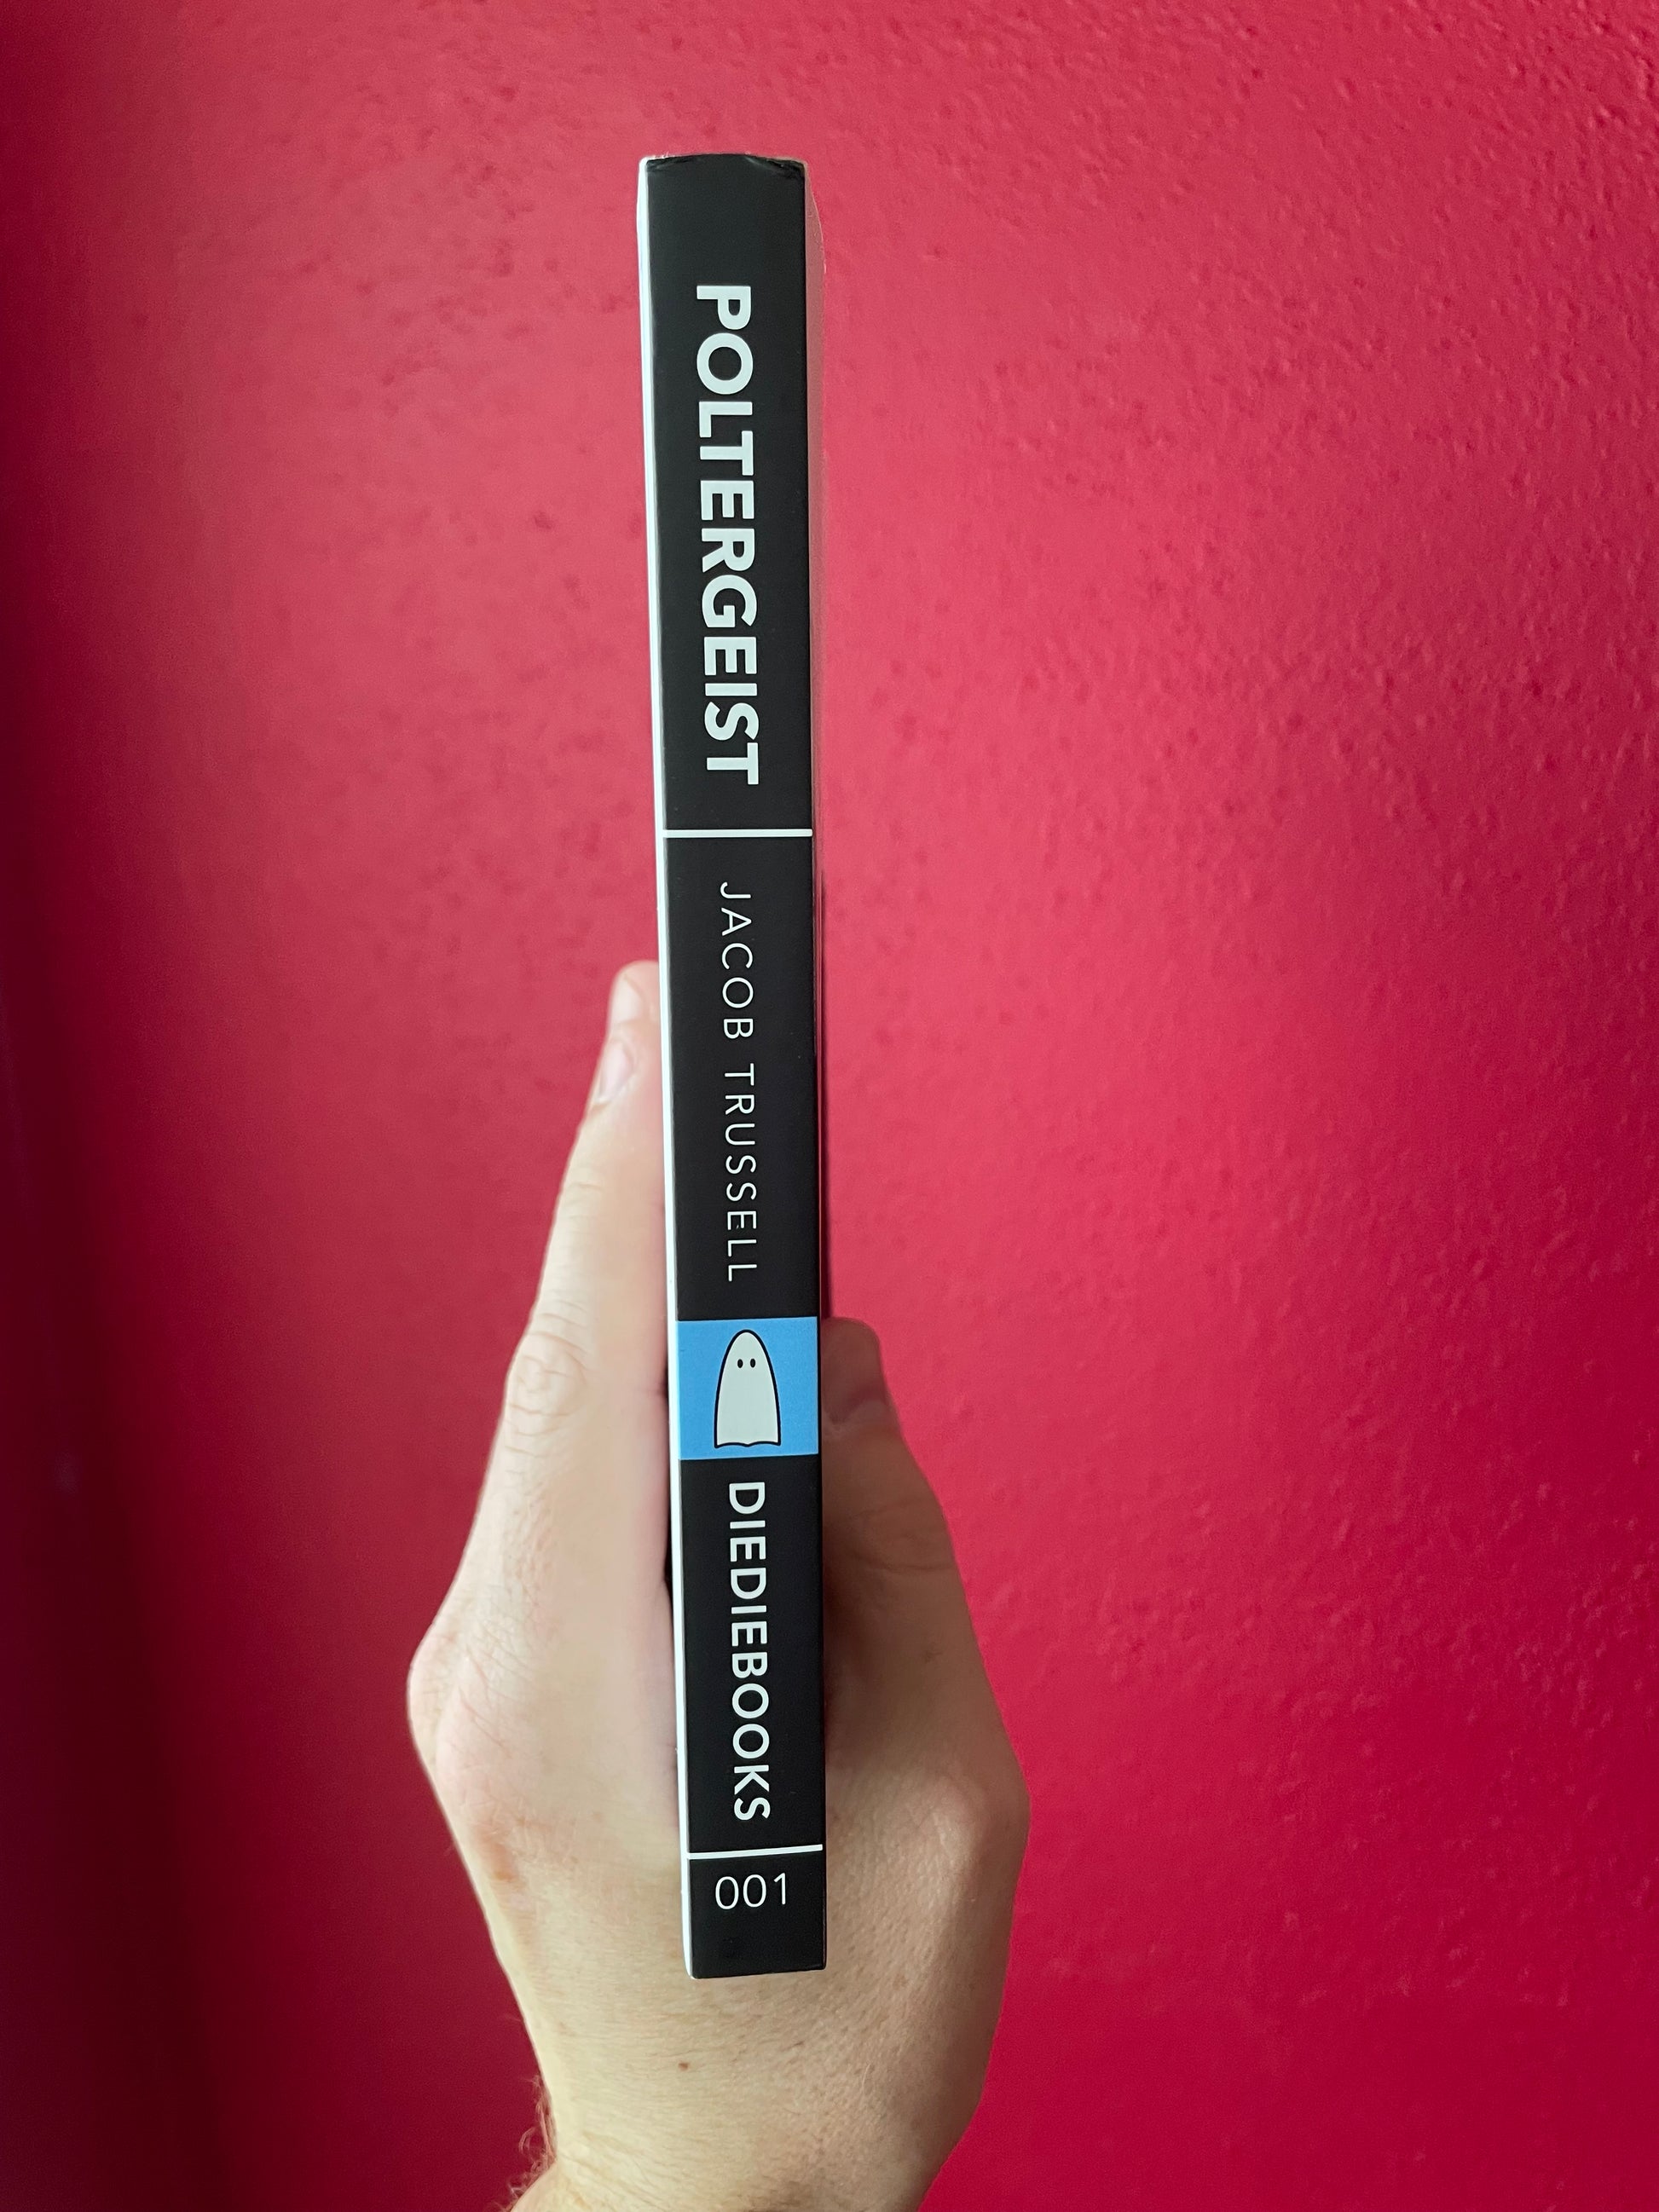 Side view of Poltergeist book by Jacob Trussell